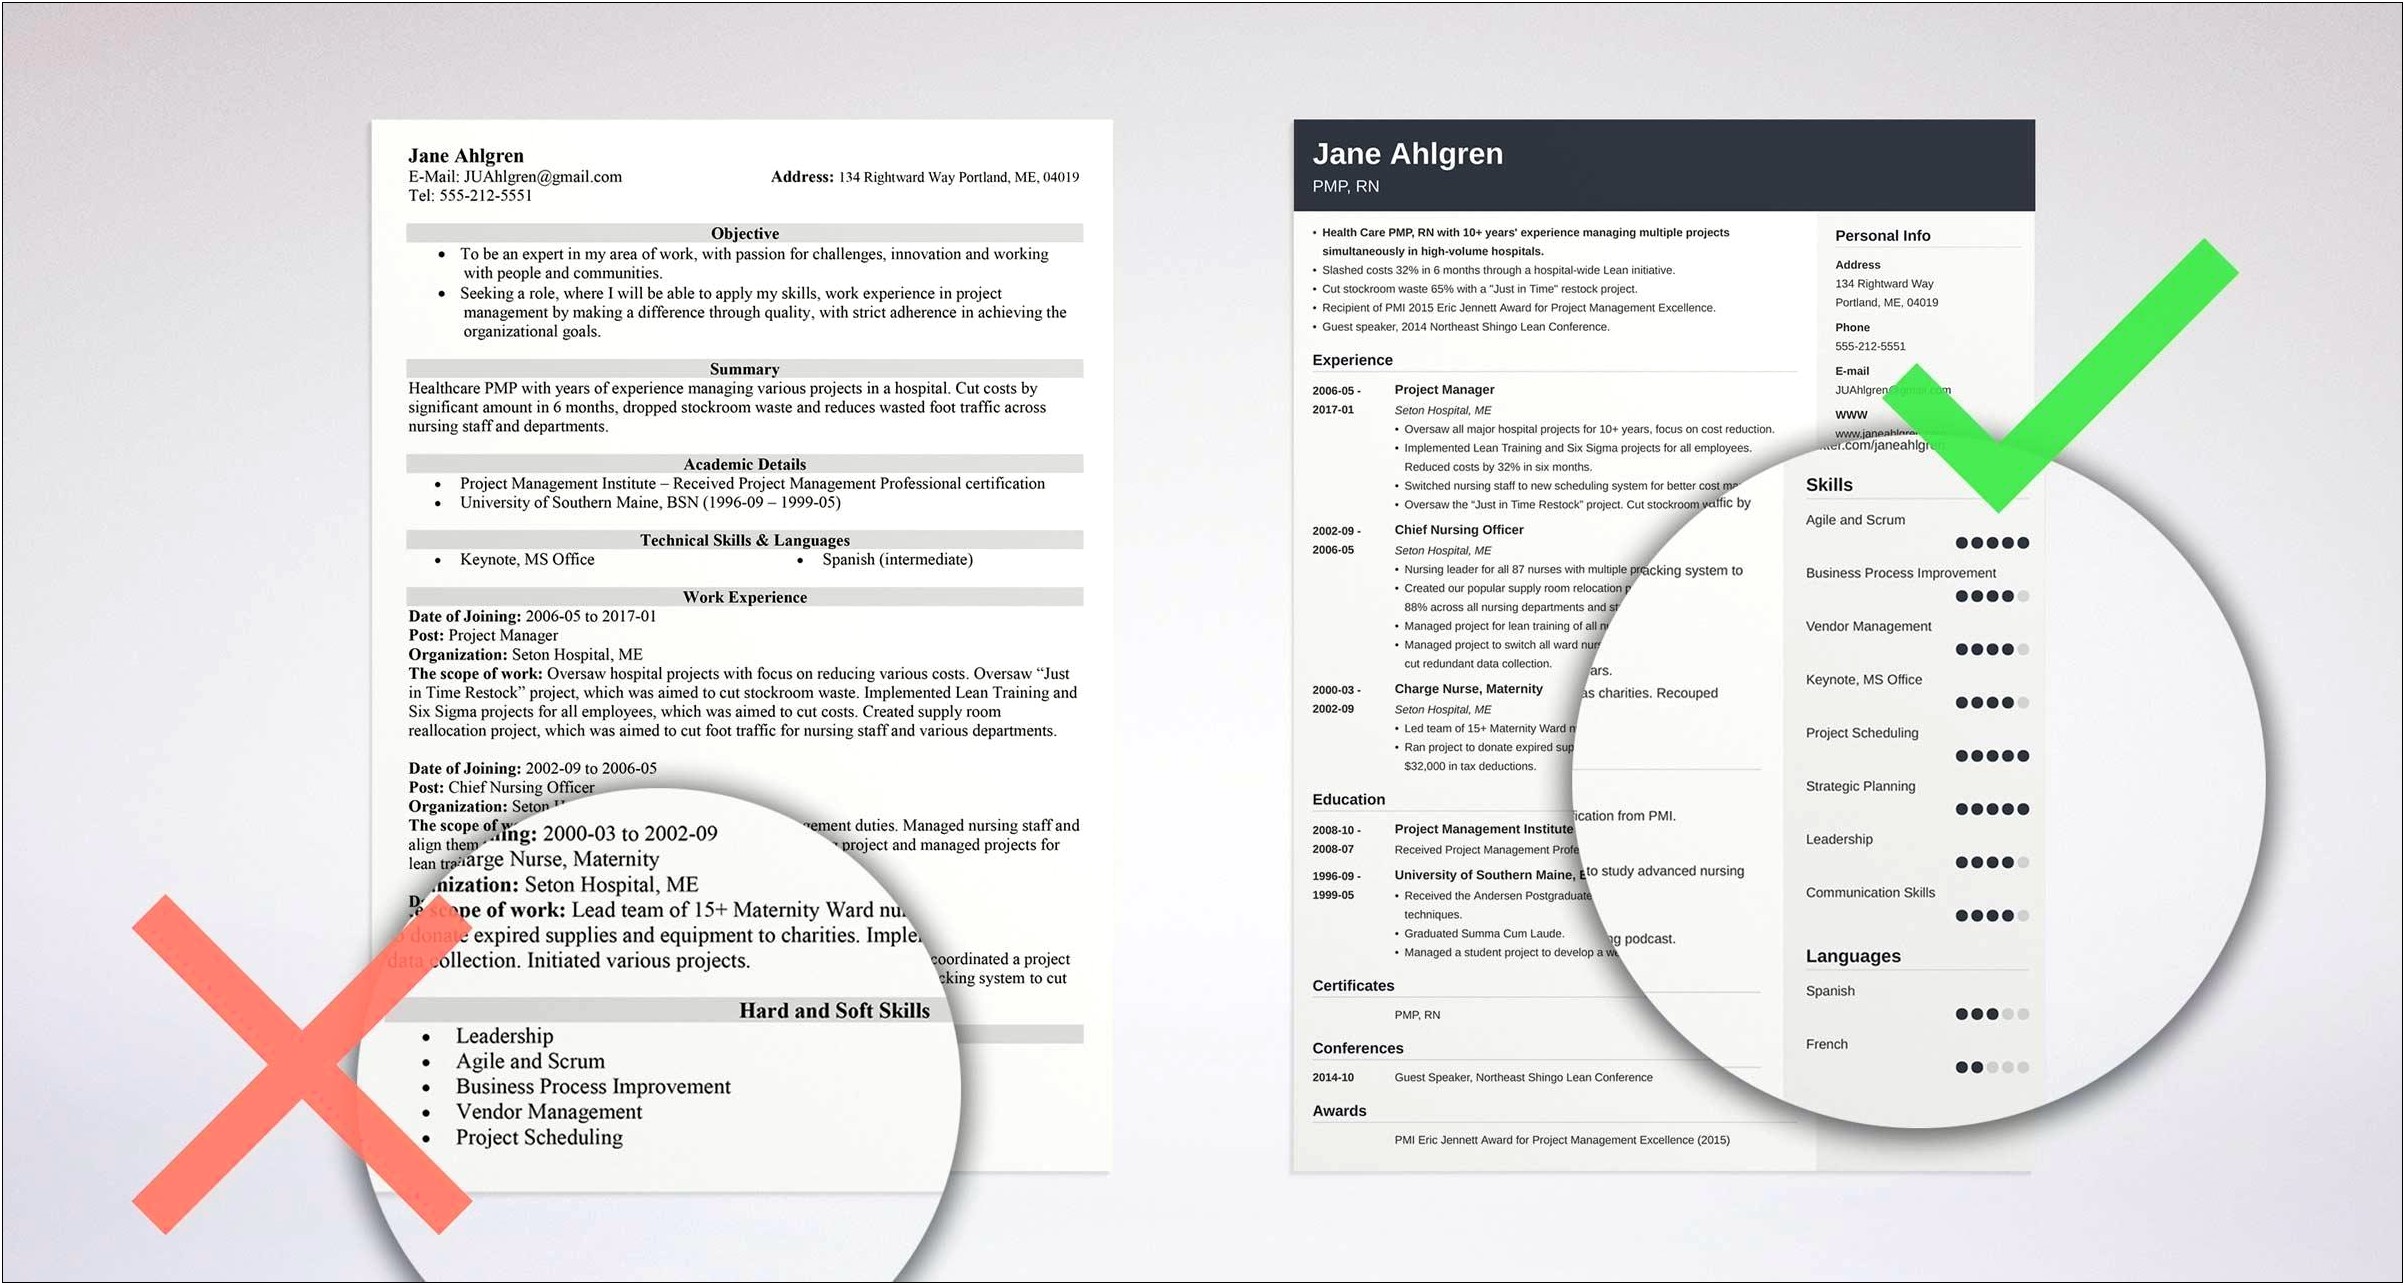 Resume Skills And Abilities Section Examples